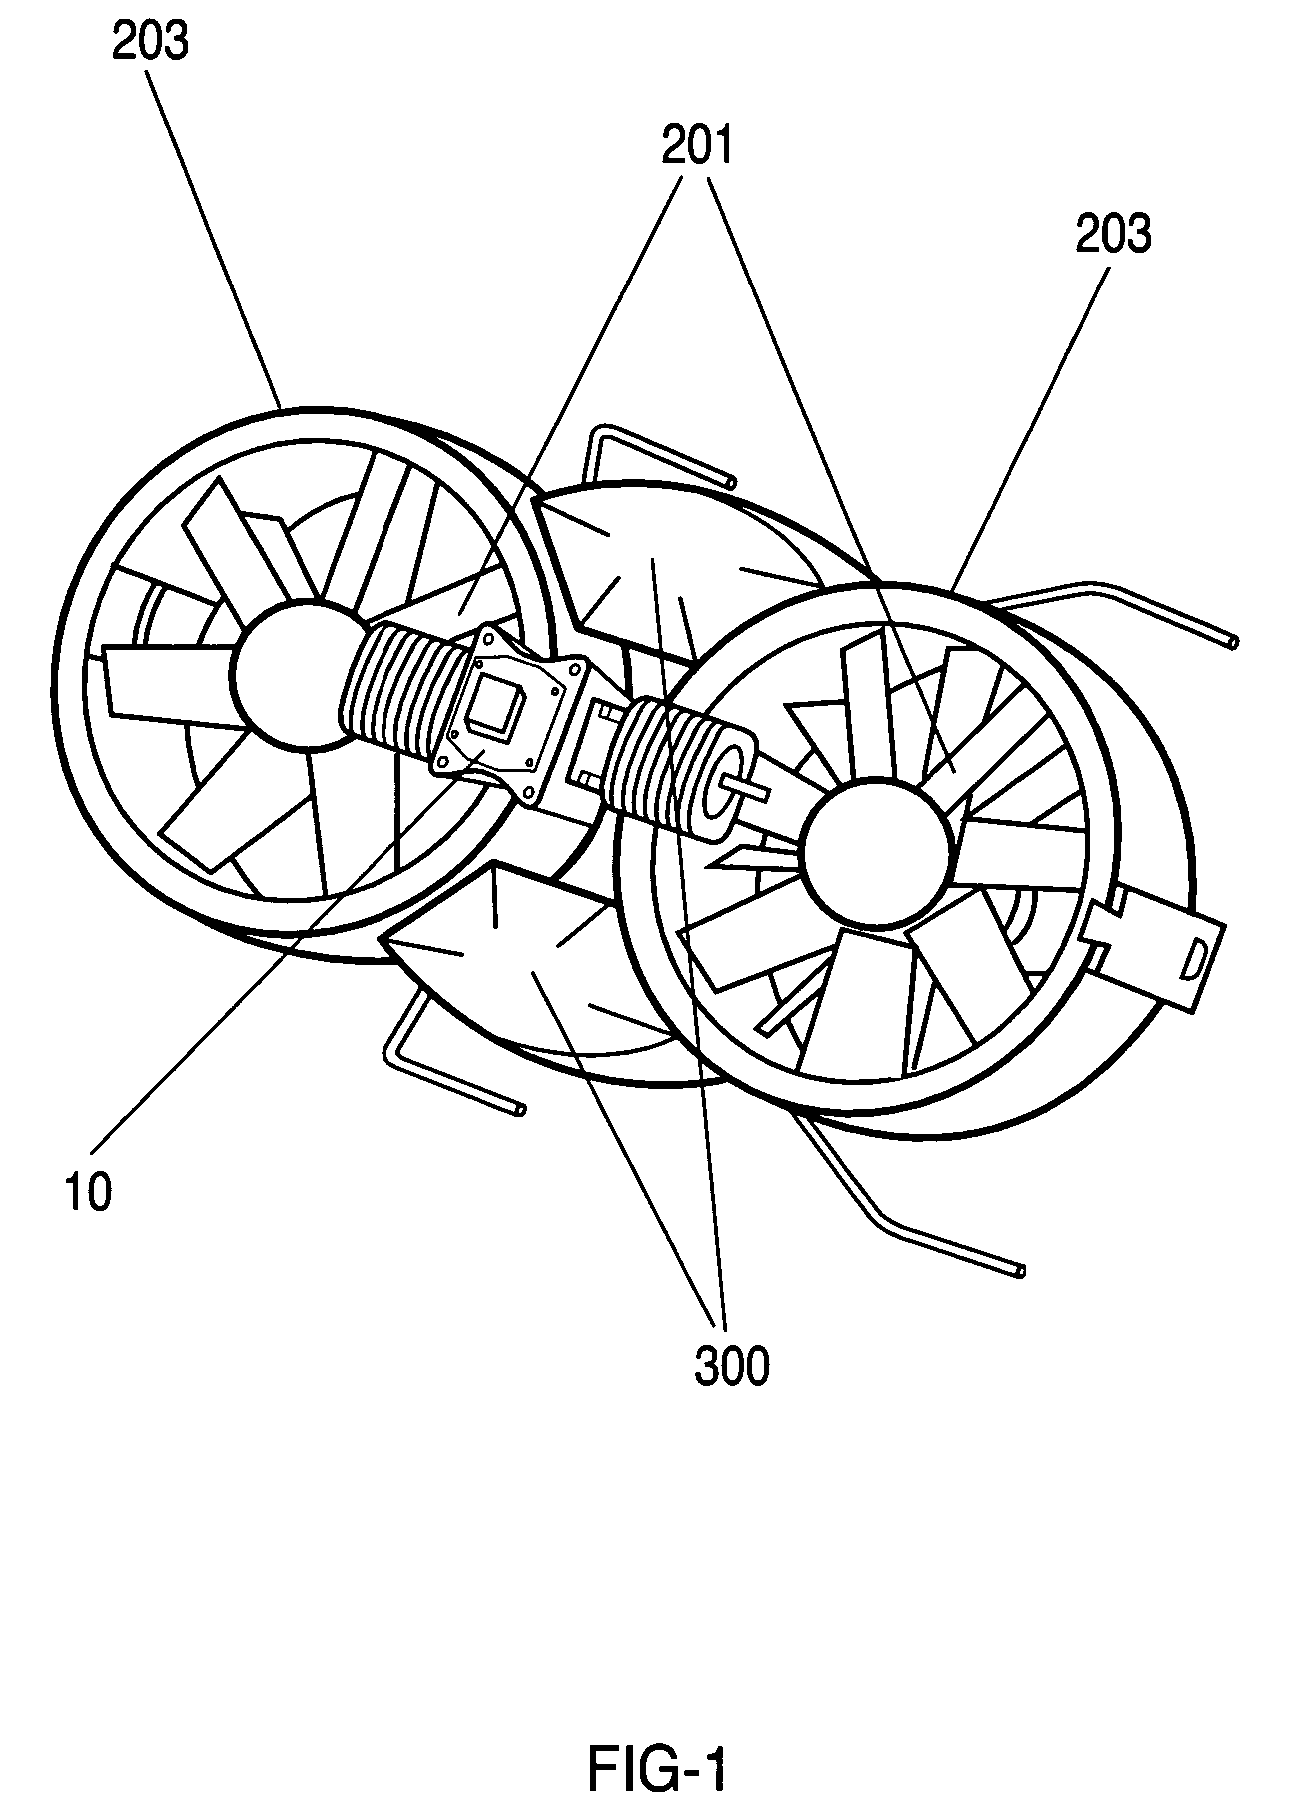 Double ducted hovering air-vehicle